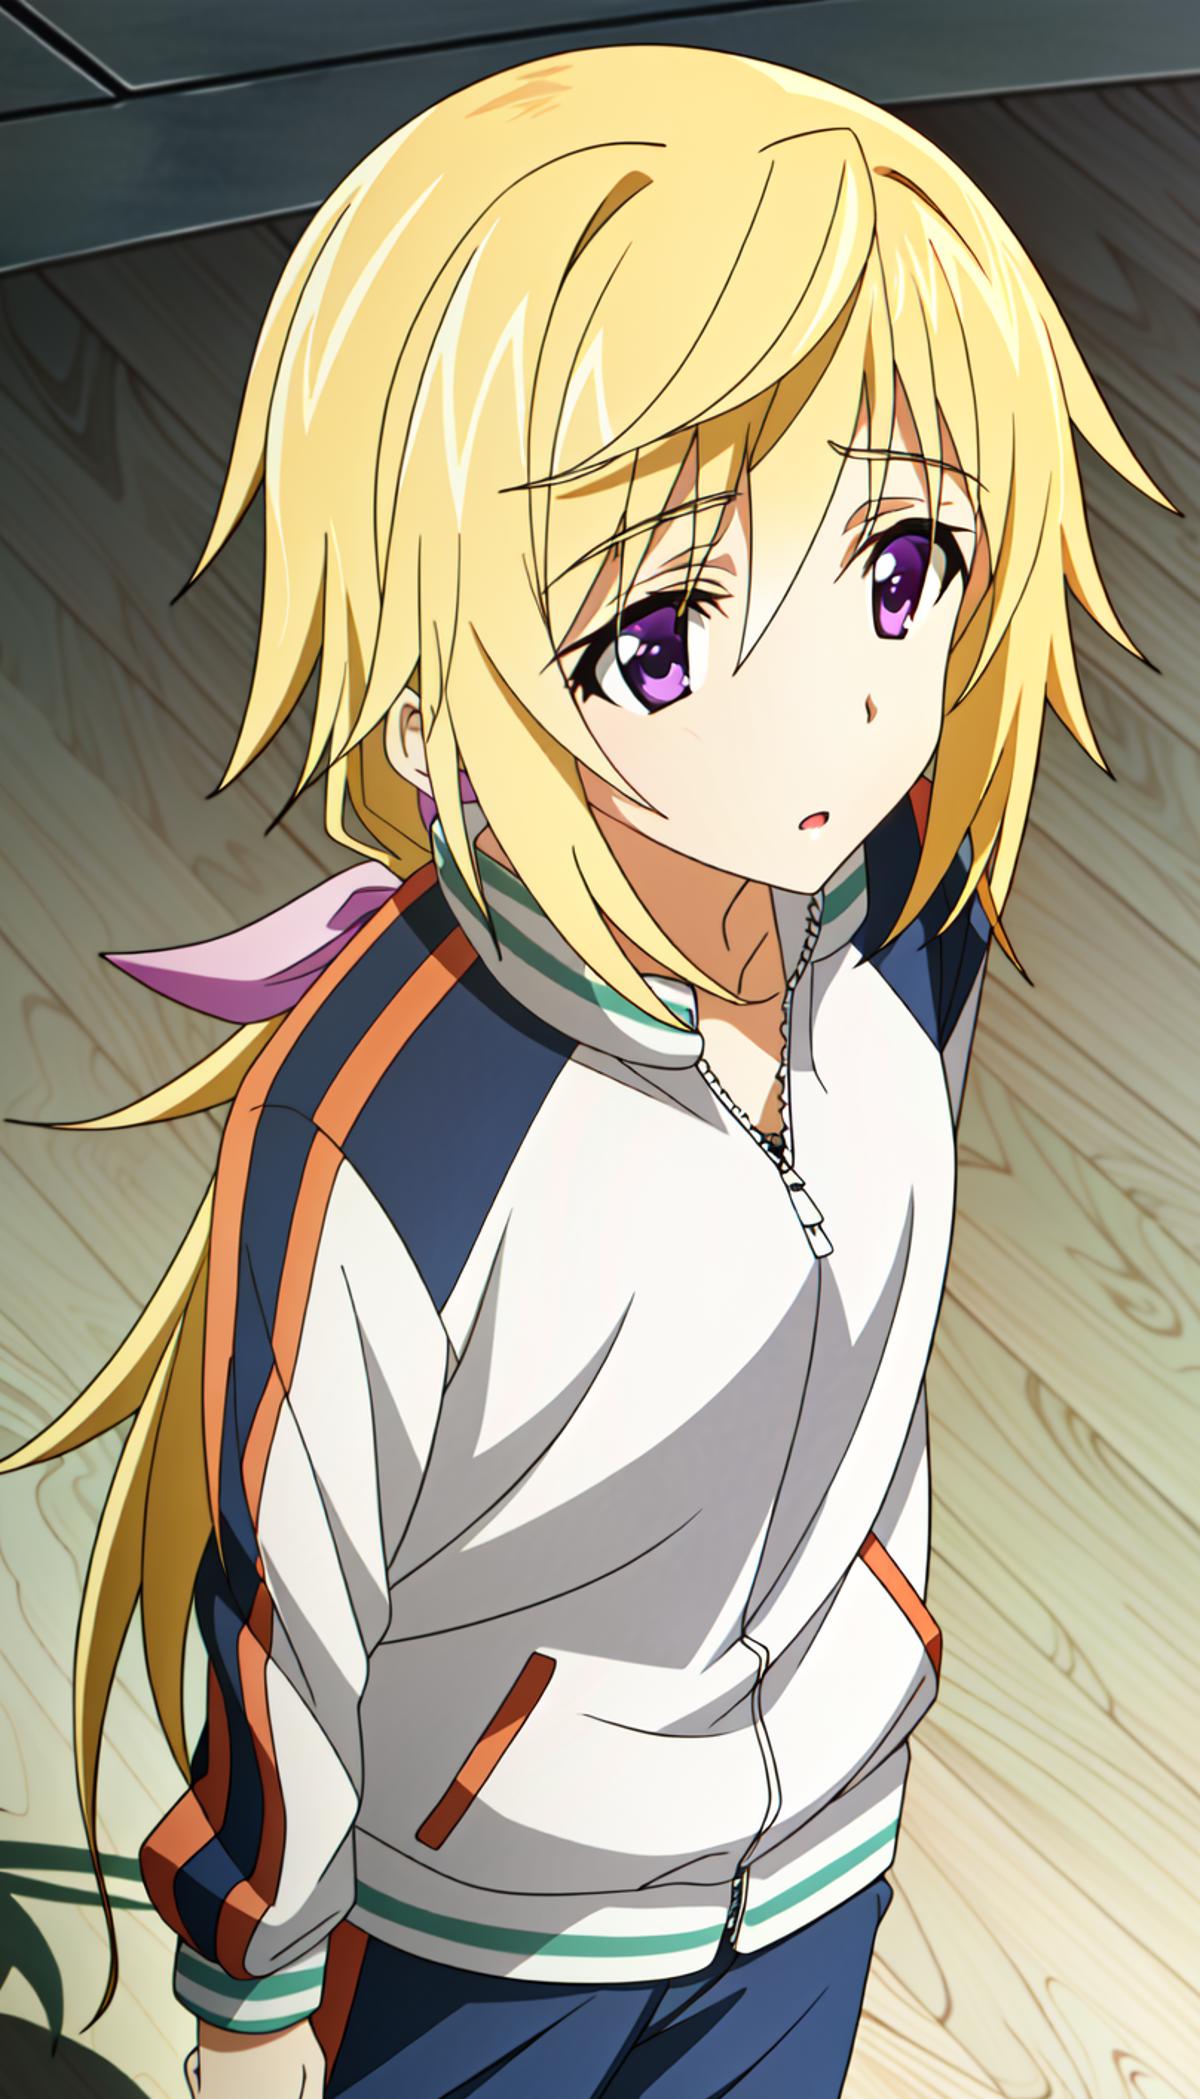 Charlotte Dunois | Infinite Stratos image by OG_Turles